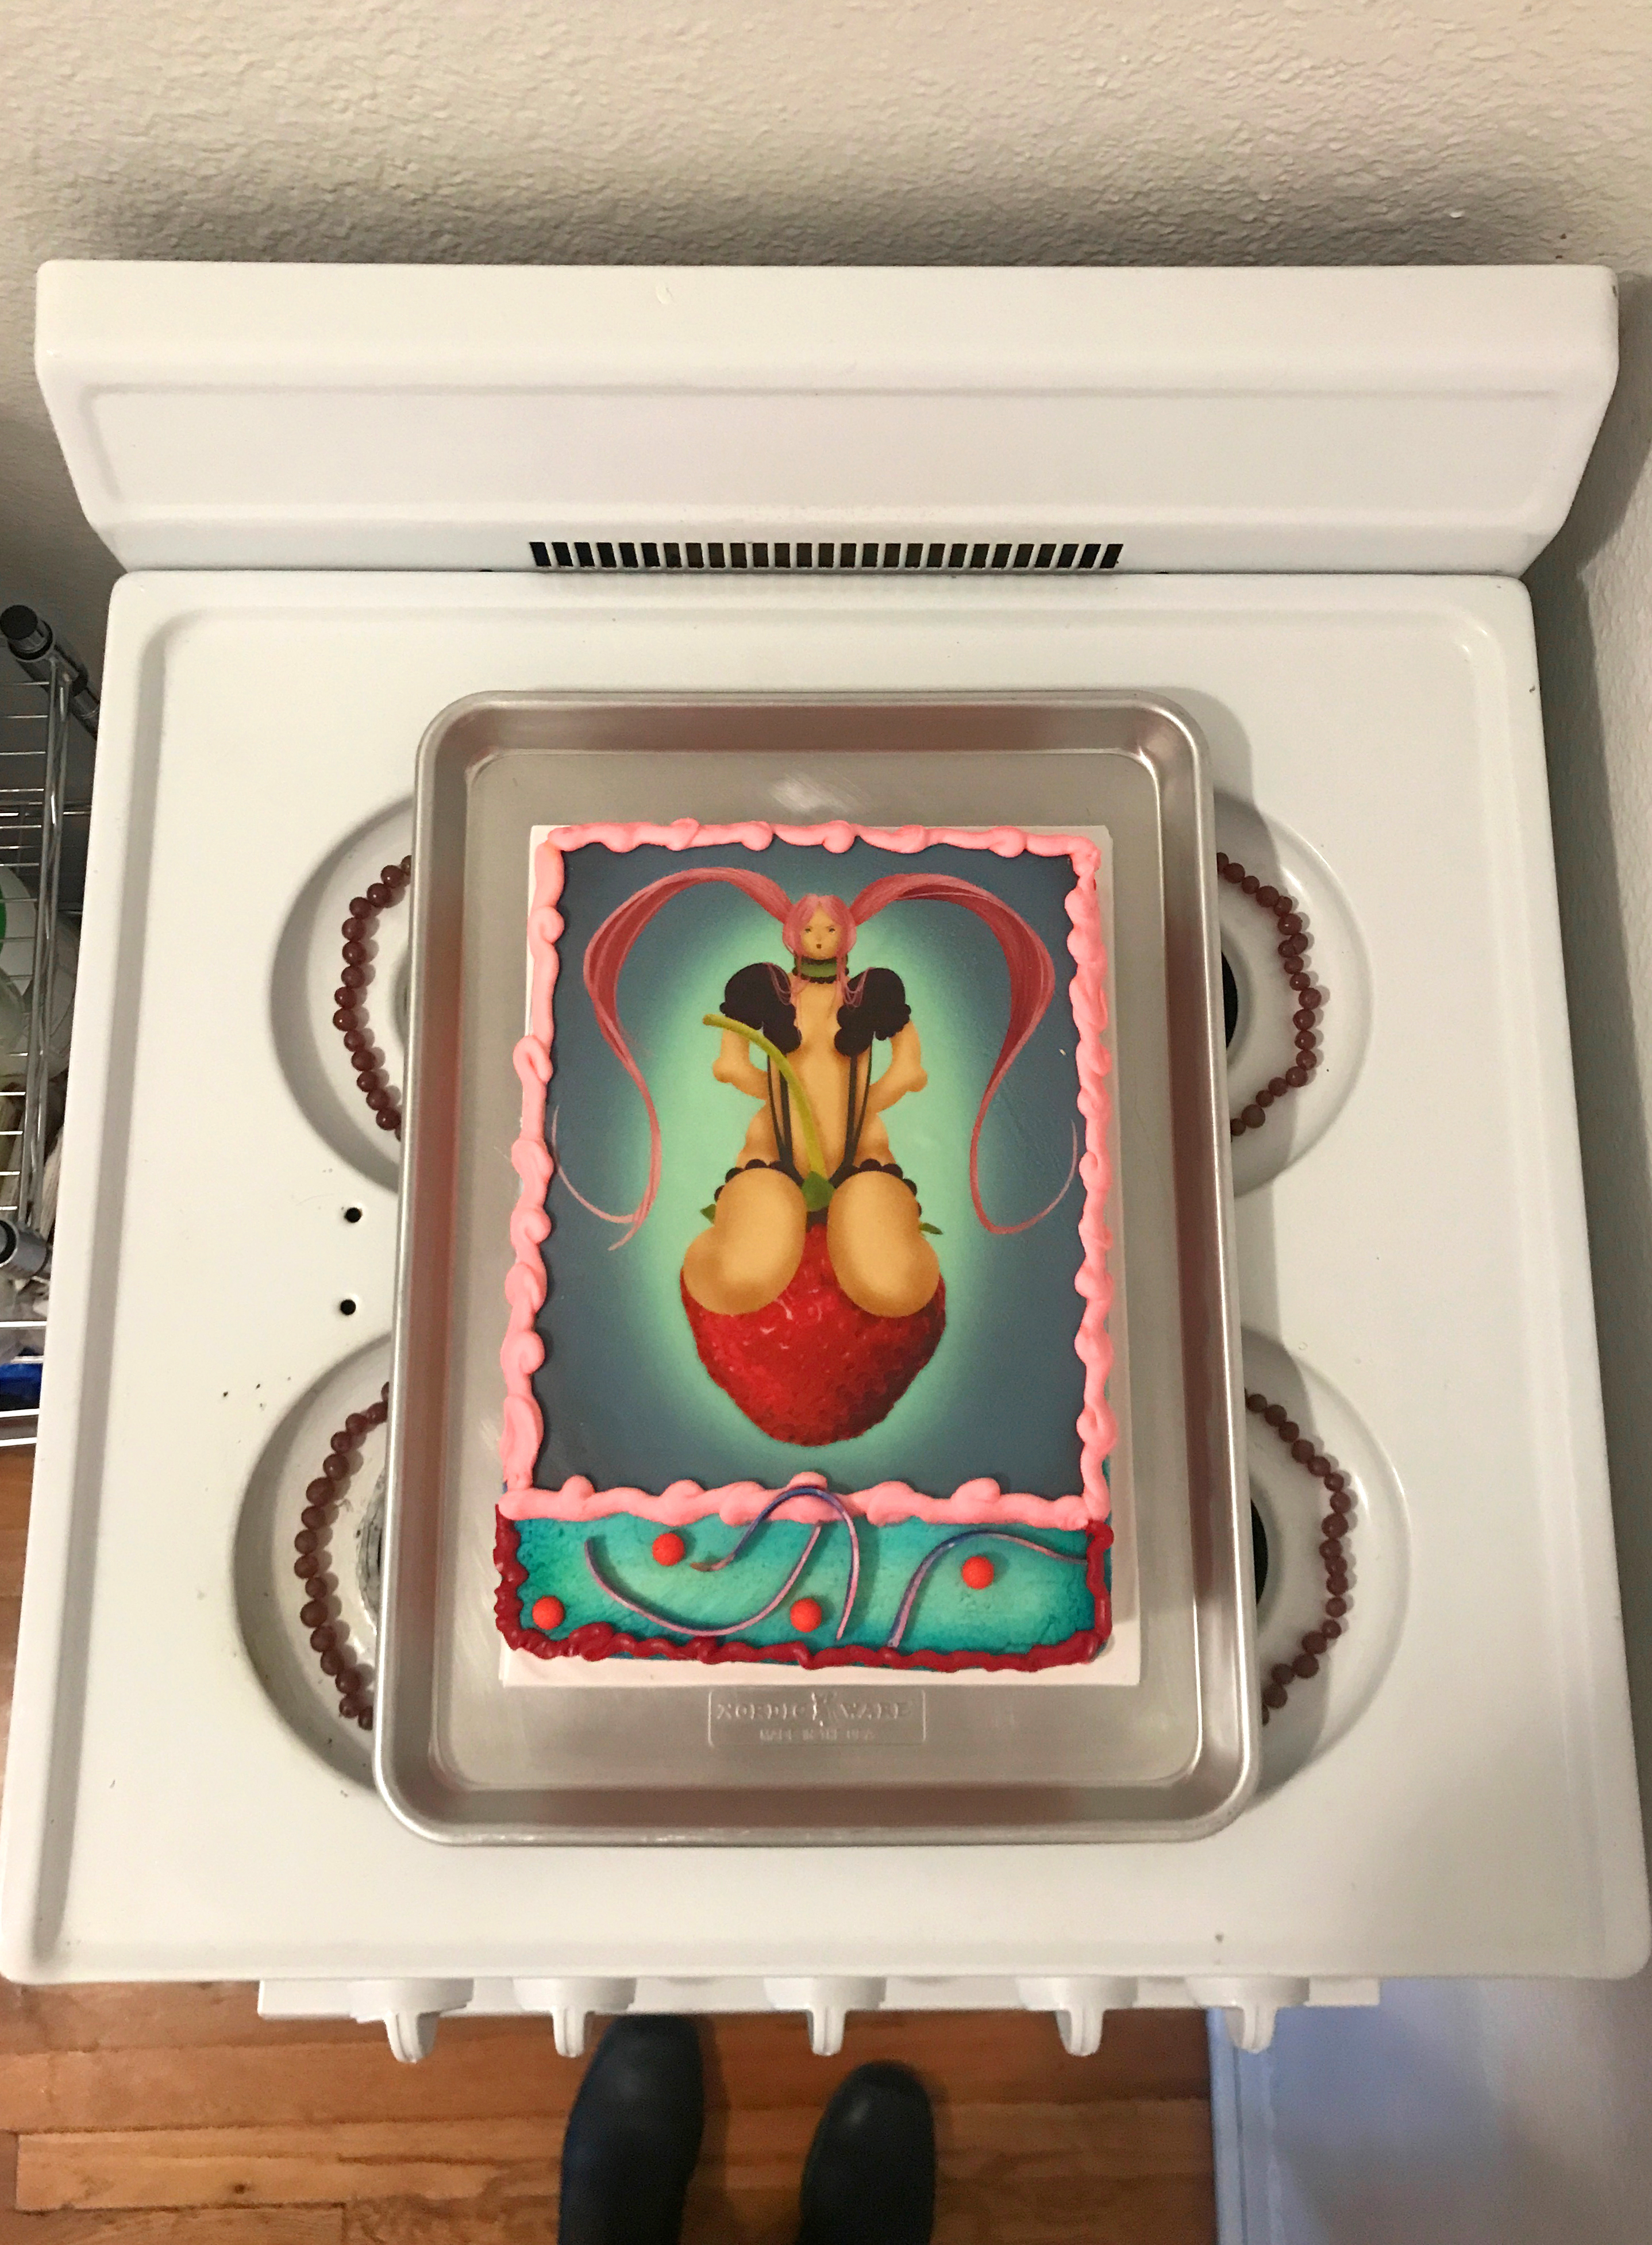 Ariel view of a cake with an illustration of a girl on it atop a stove